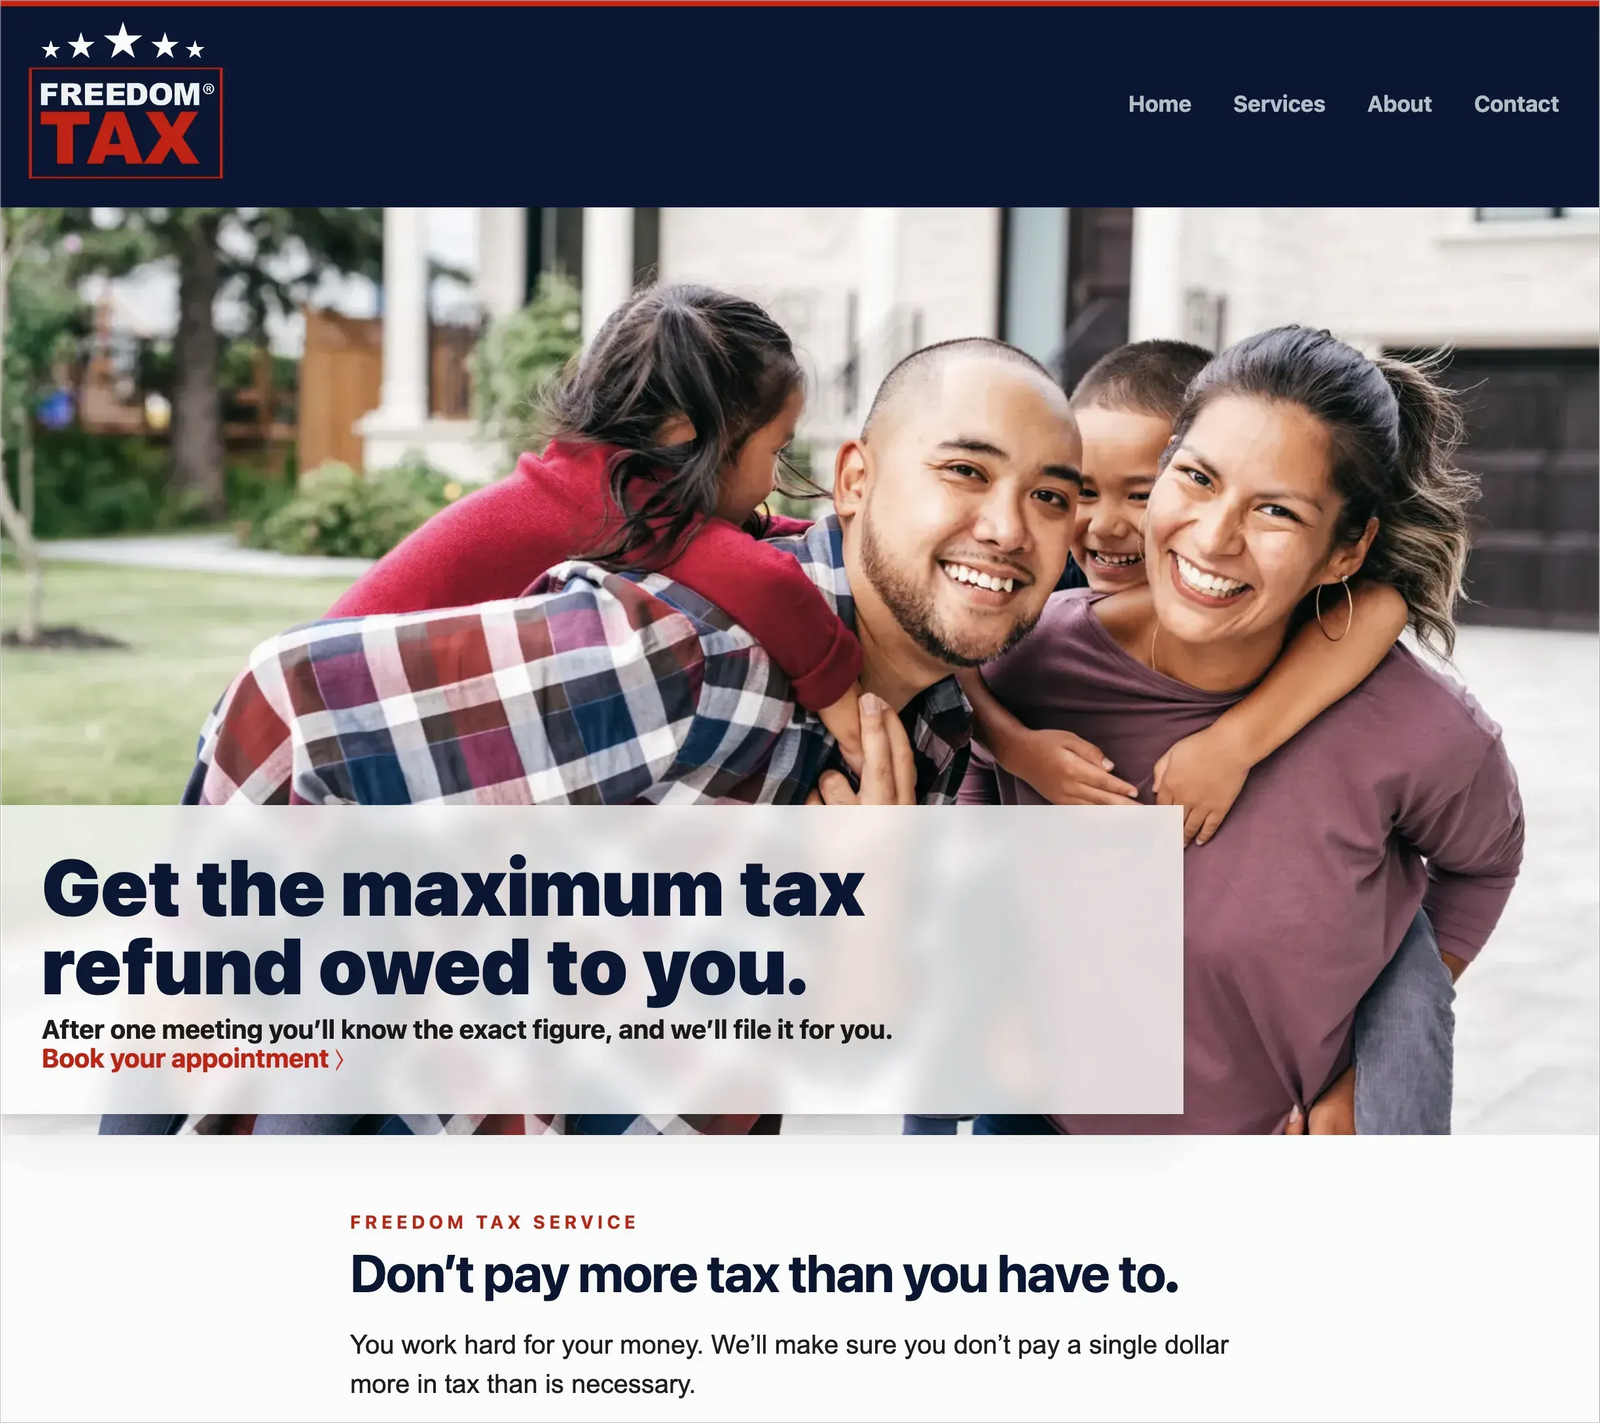 website key benefit statement example from freedom tax